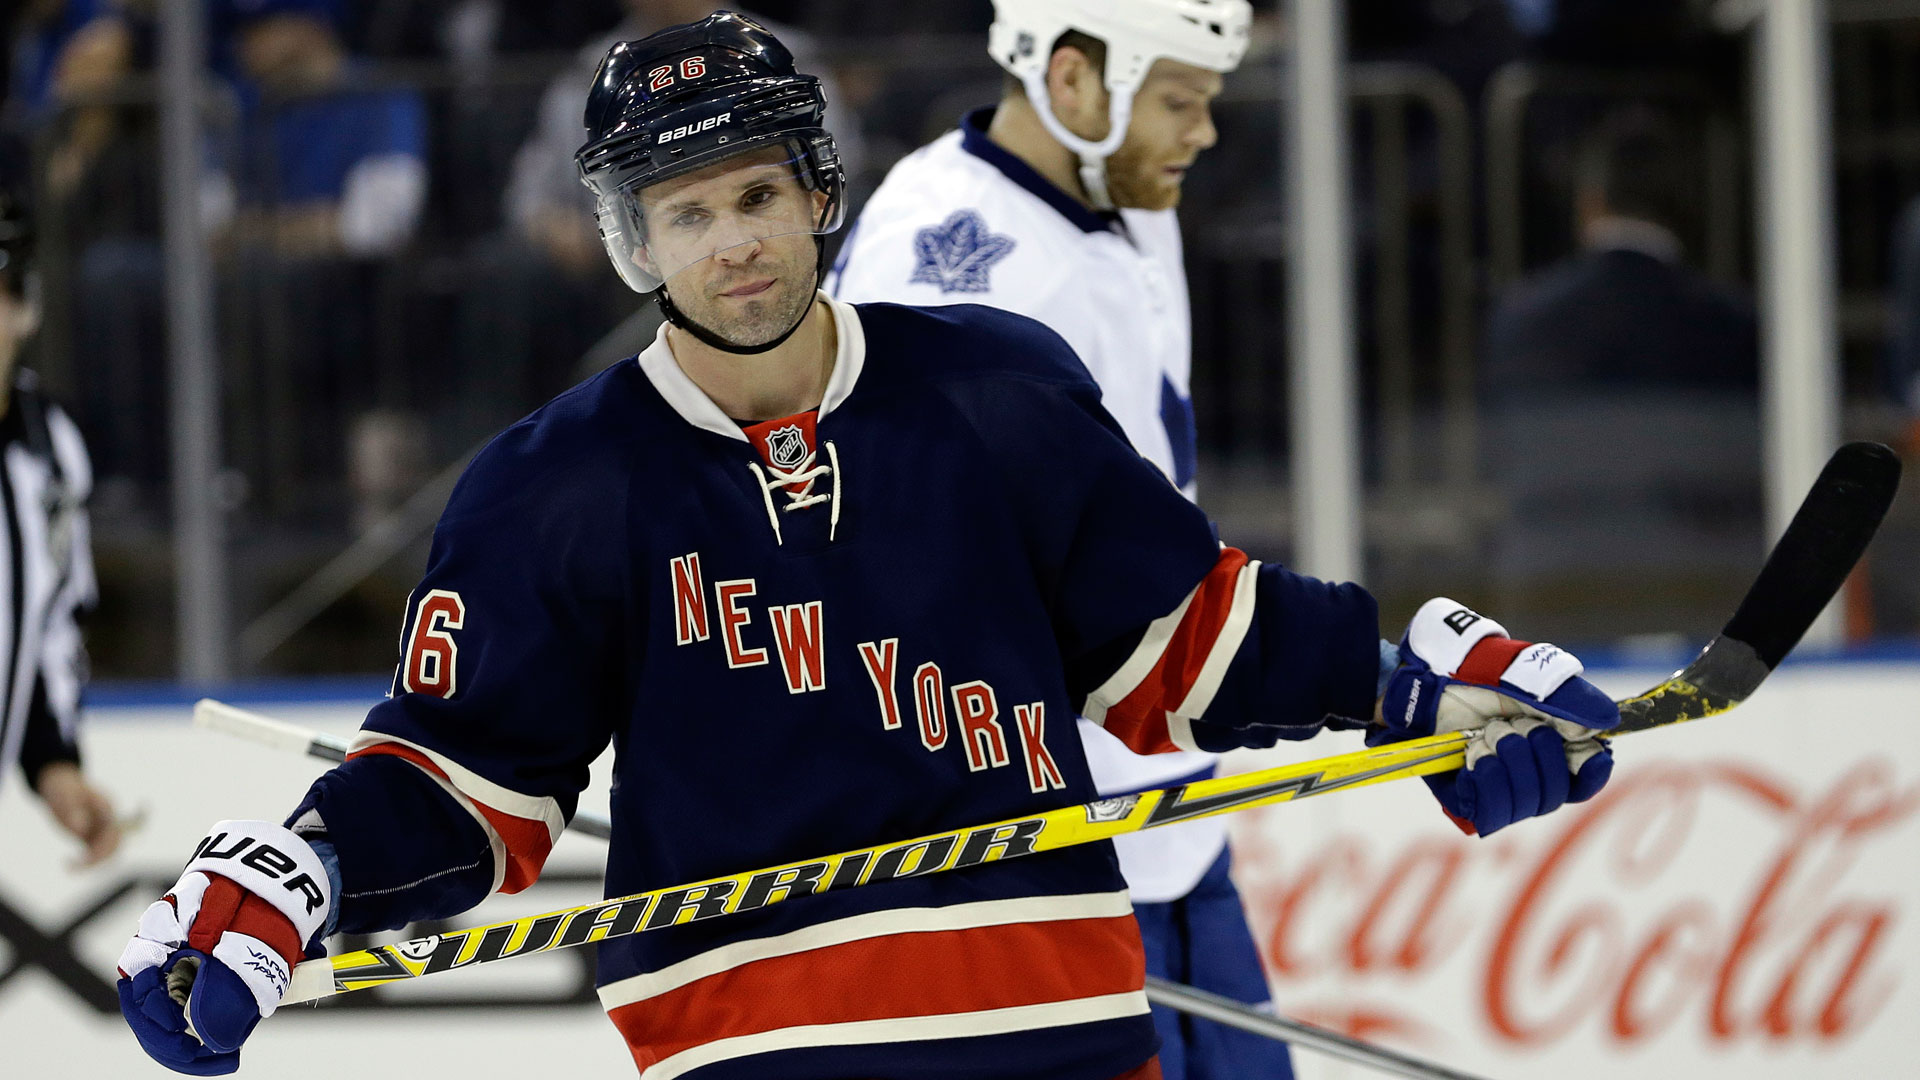 Even before Martin St. Louis trade, the Rangers were on the rise | Sporting News